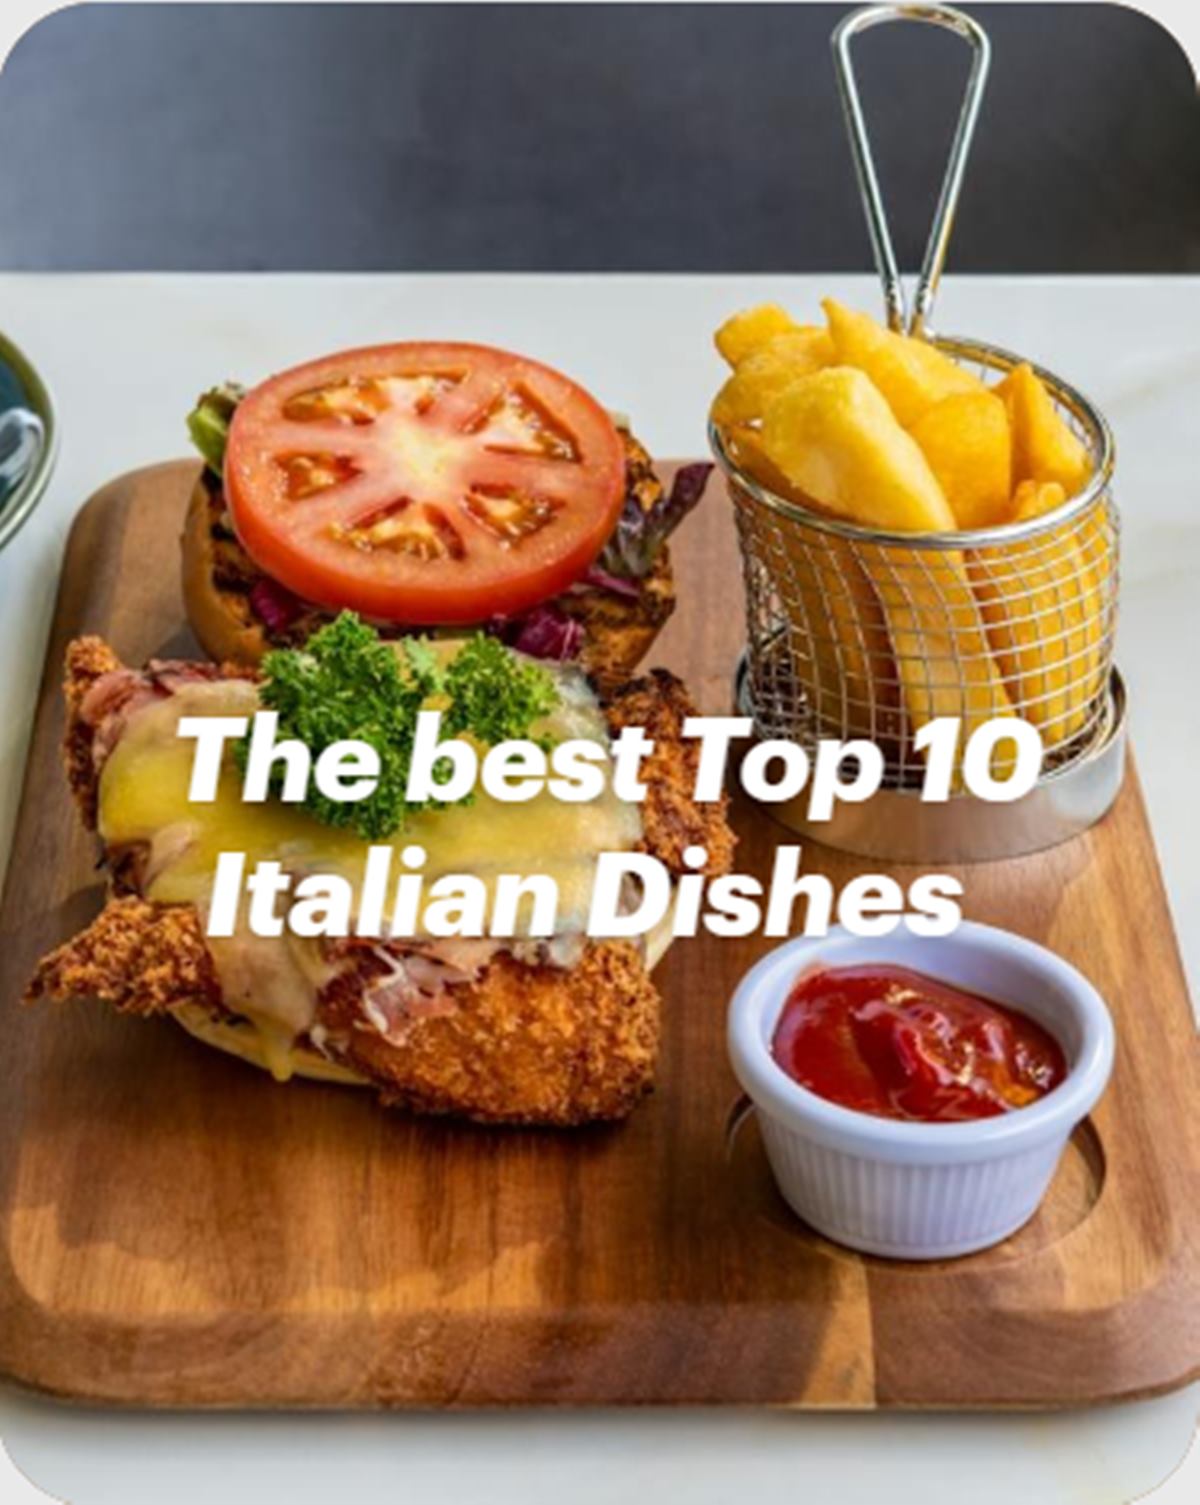 The best Top 10 Italian Dishes